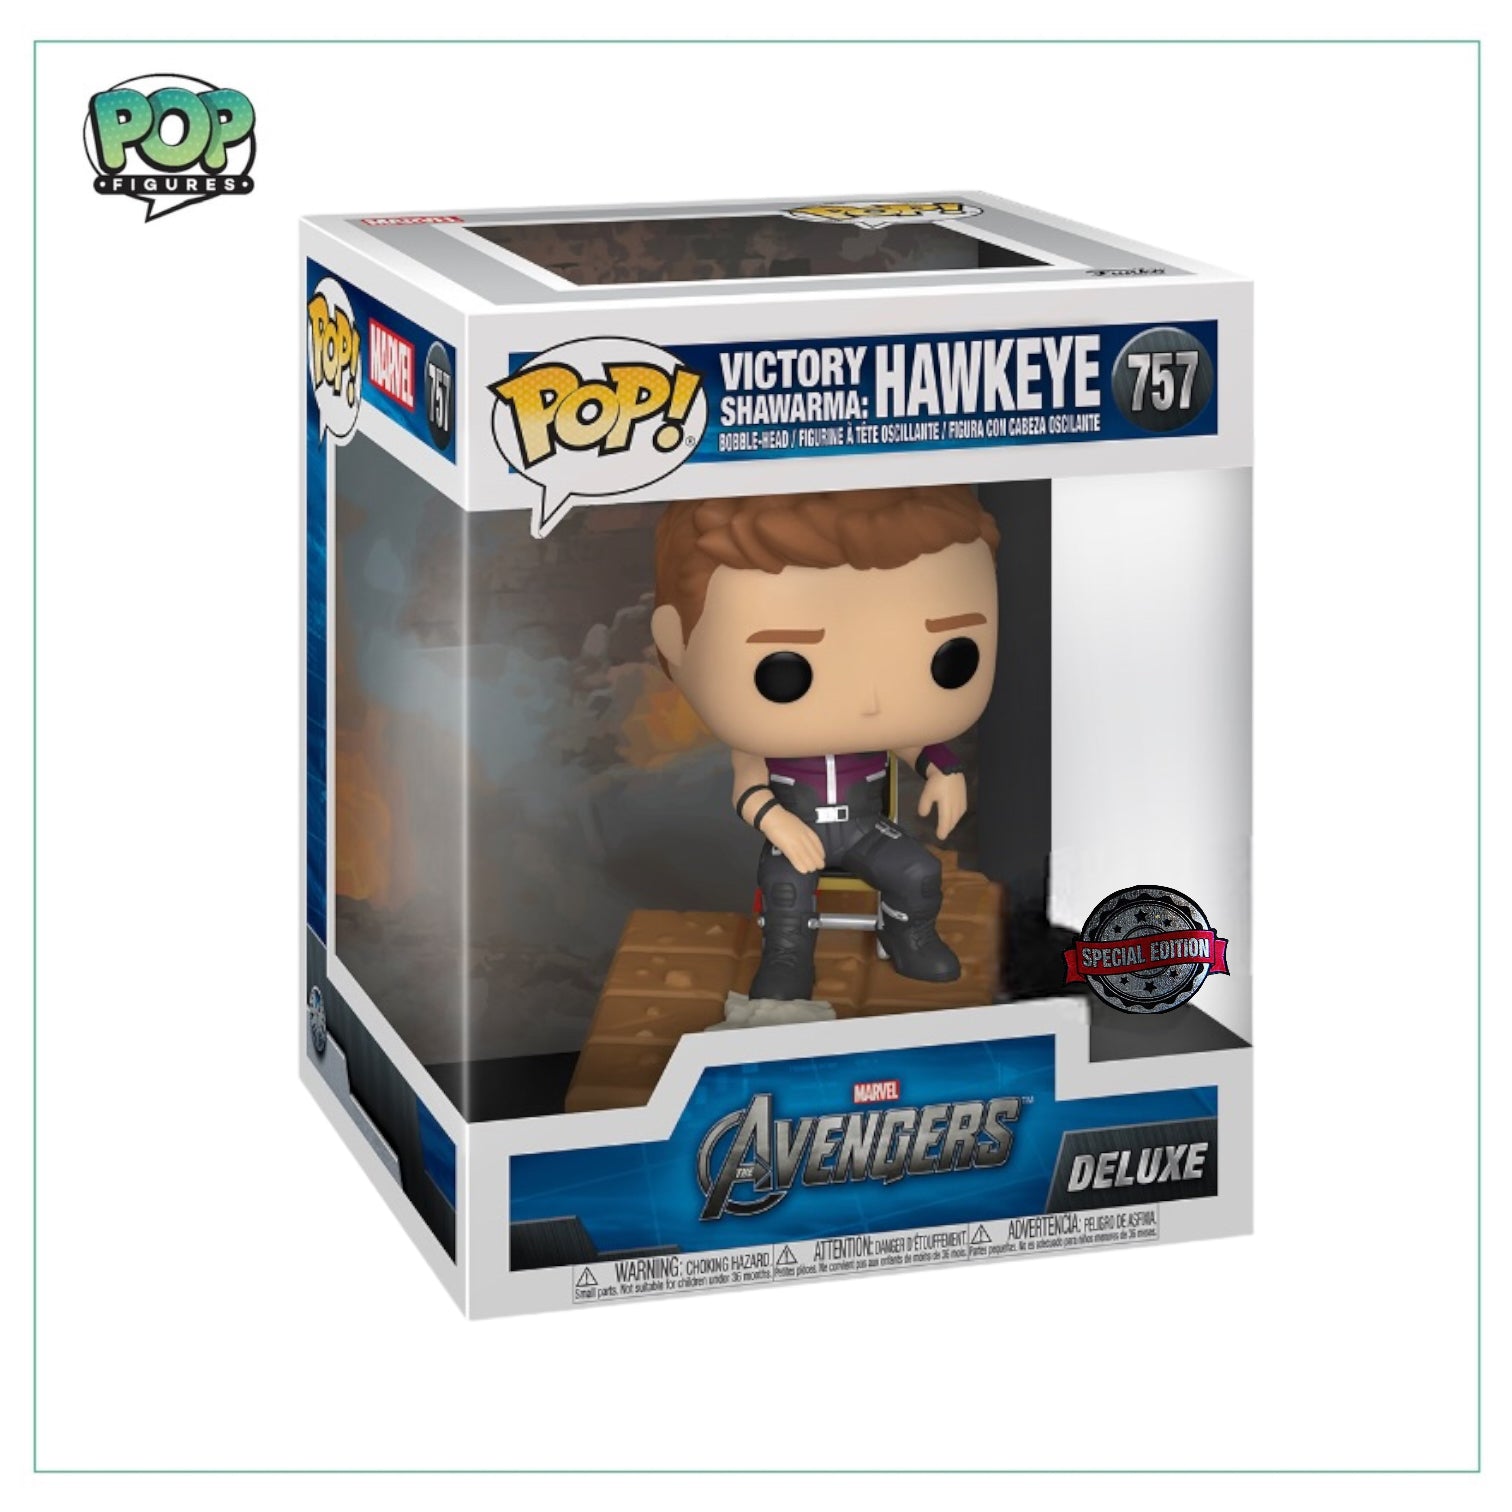 Victory Shawarma: Hawkeye #757 Deluxe Funko Pop! - Marvel Avengers- Special Edition